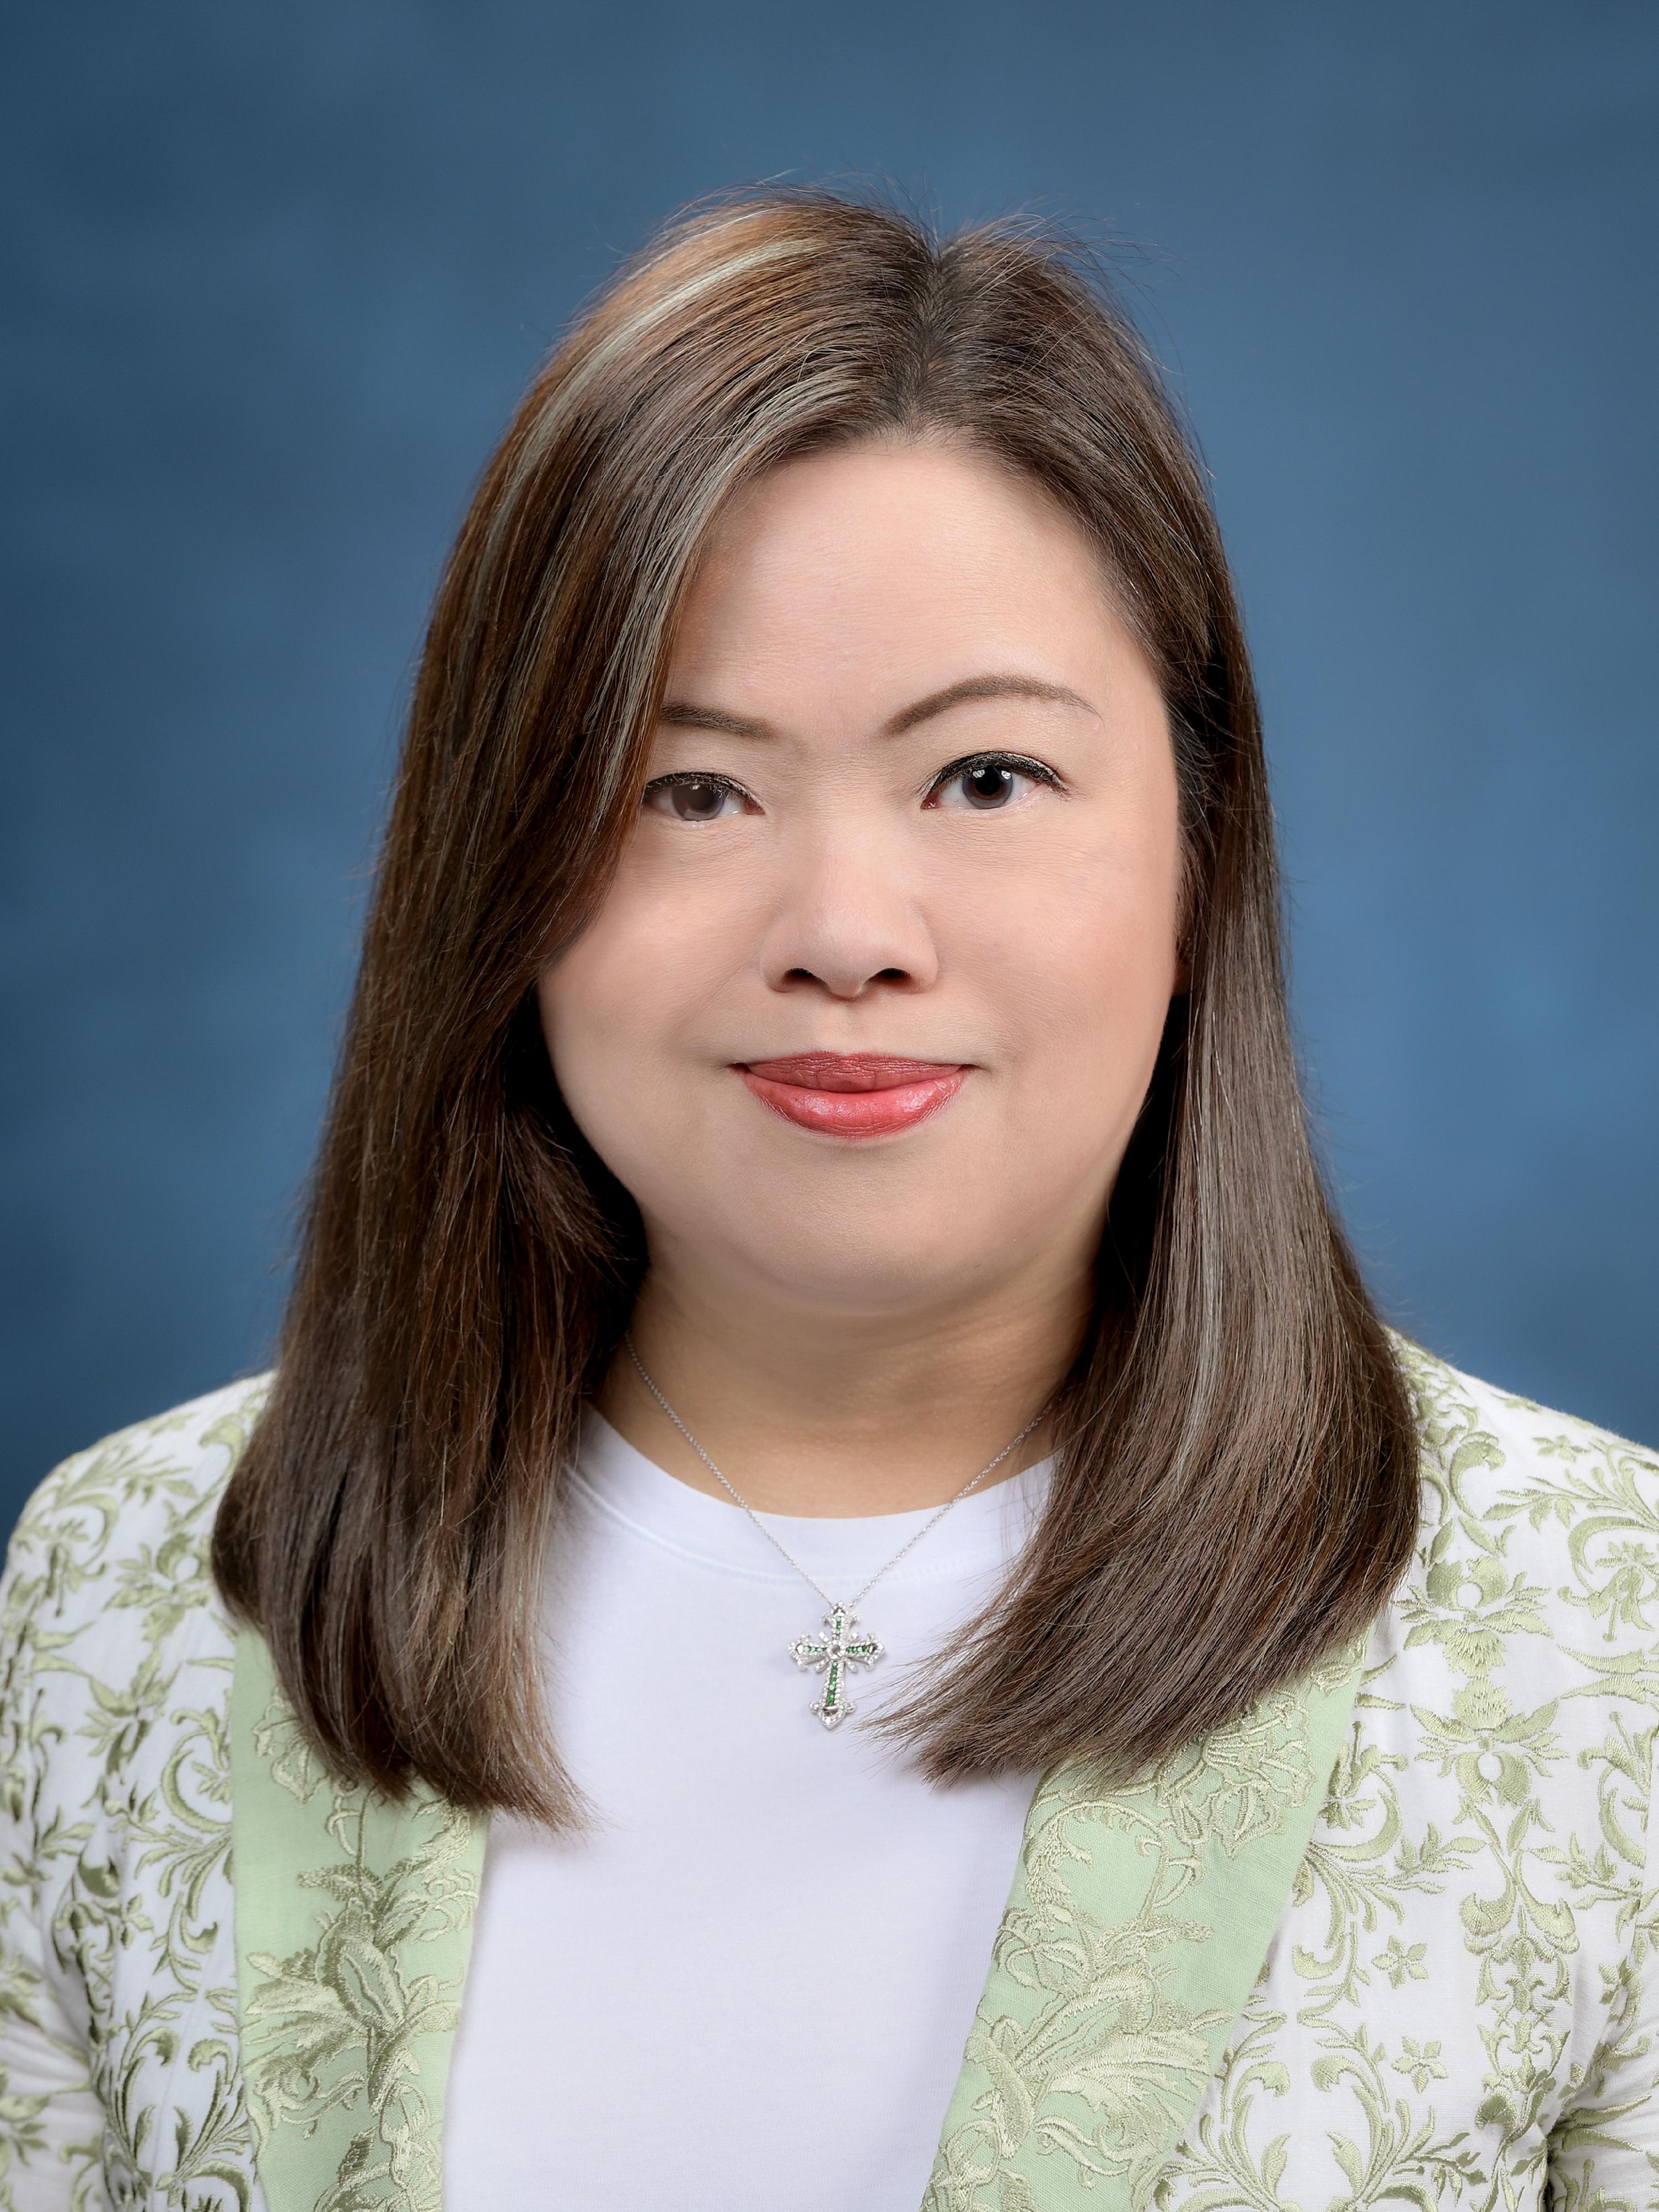 Miss Rosanna Law Shuk-pui, Commissioner for Transport, will take up the appointment as Permanent Secretary for Housing/Director of Housing on August 15, 2023.